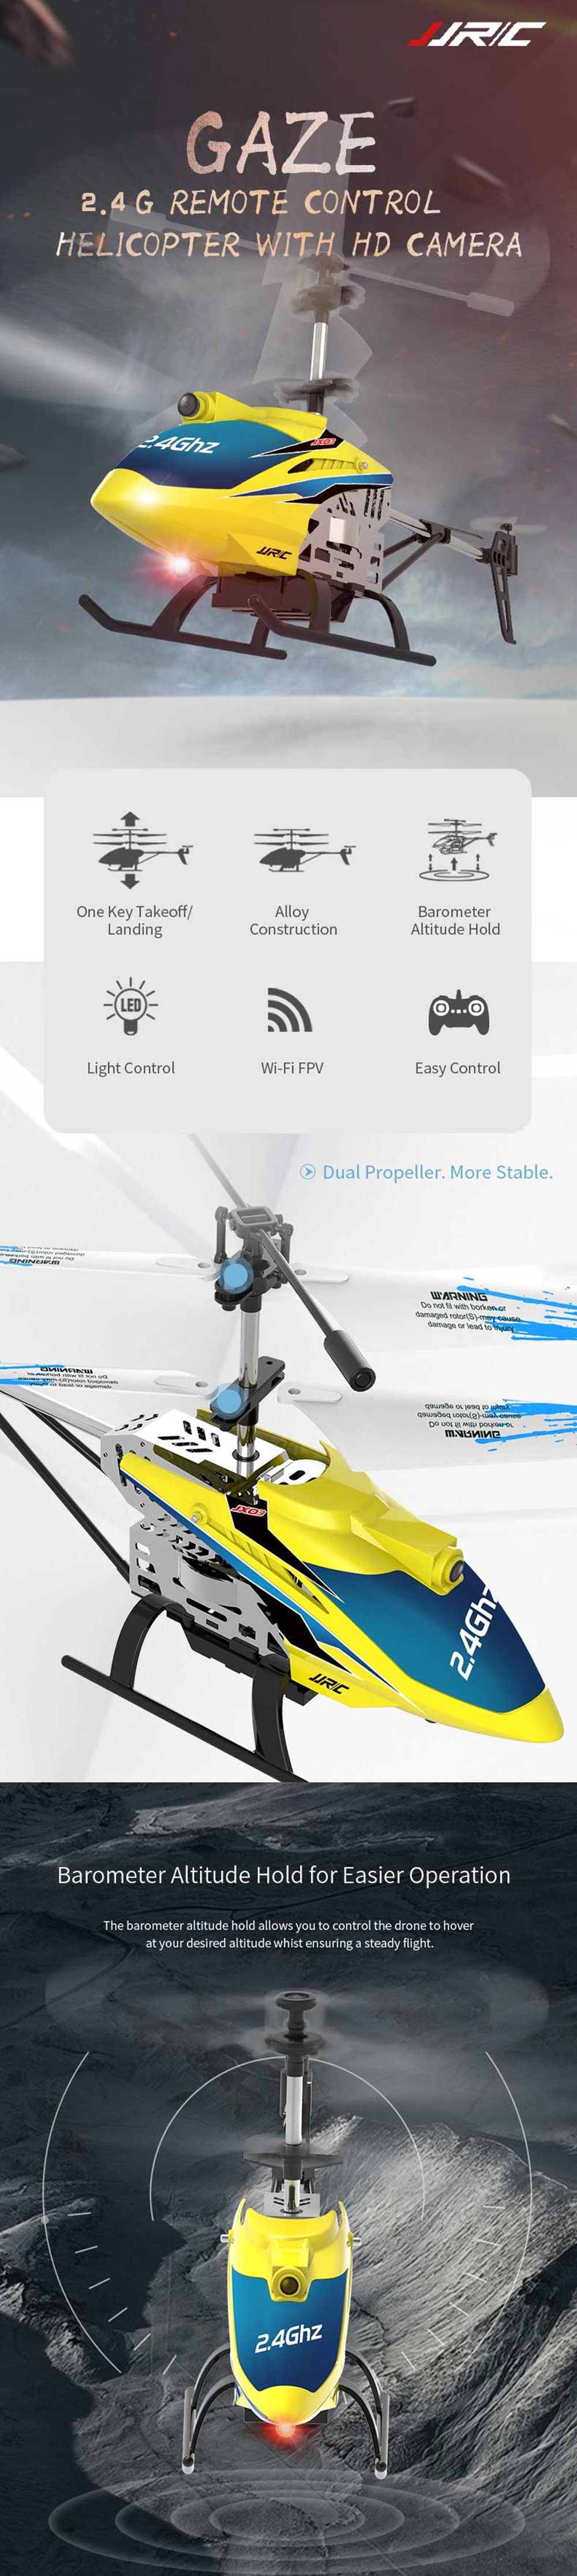 JJRC GAZE JX03 2.4G 4CH Altitude Hold Hover One-key Takeoff RC Helicopter RTF With 720P HD Camera